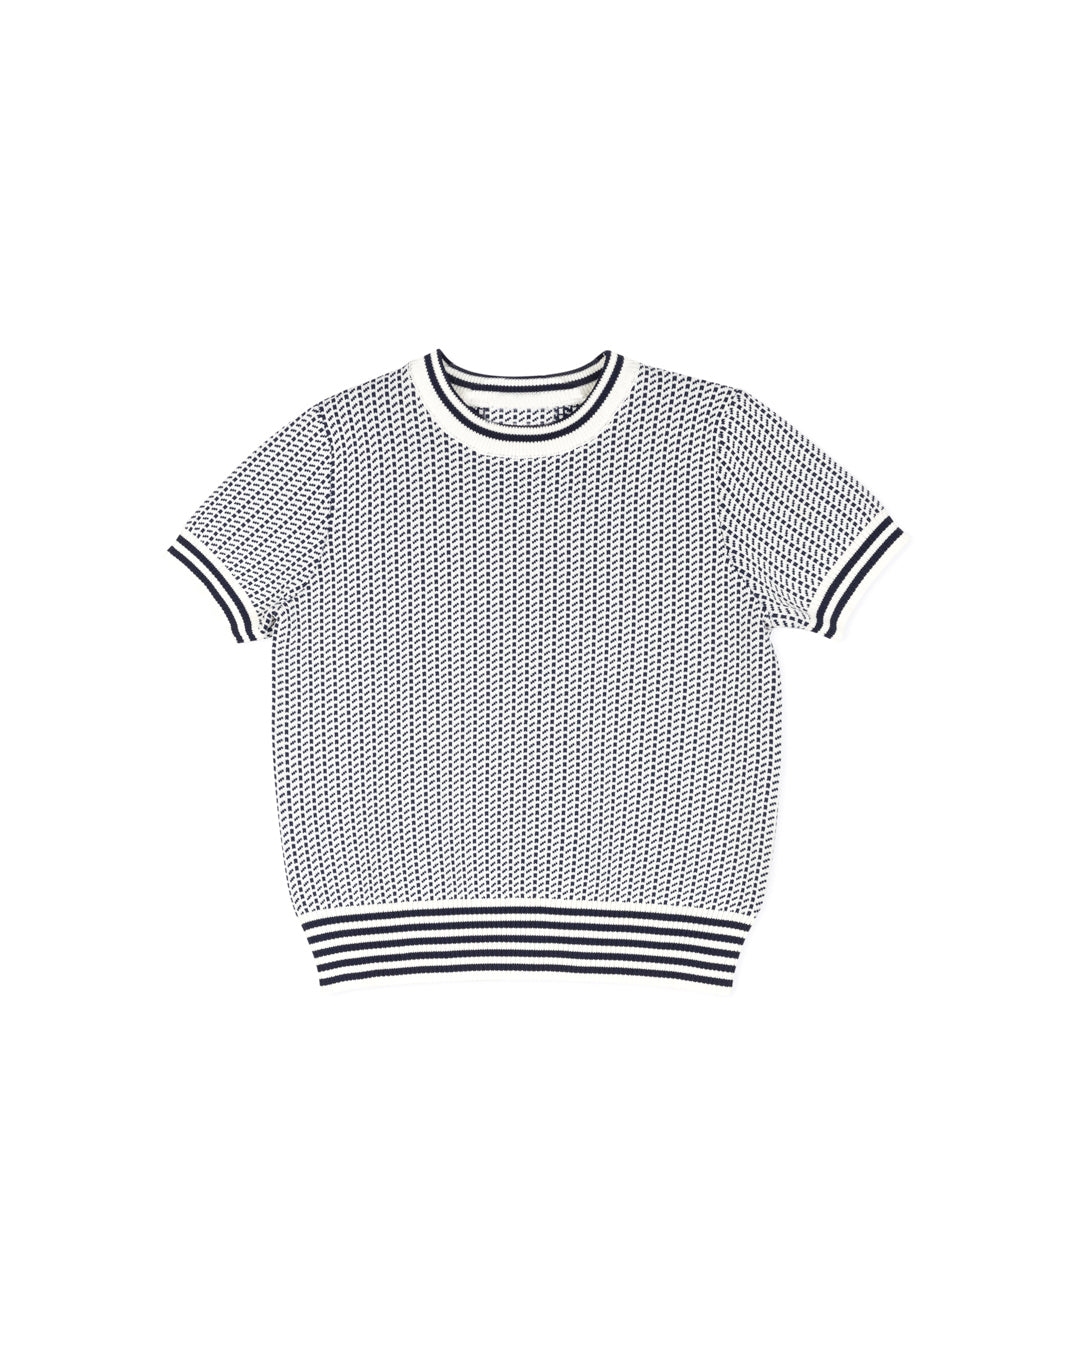 HARPER JAMES NAVY KNIT STRIPED TRIMMING SWEATER [FINAL SALE]